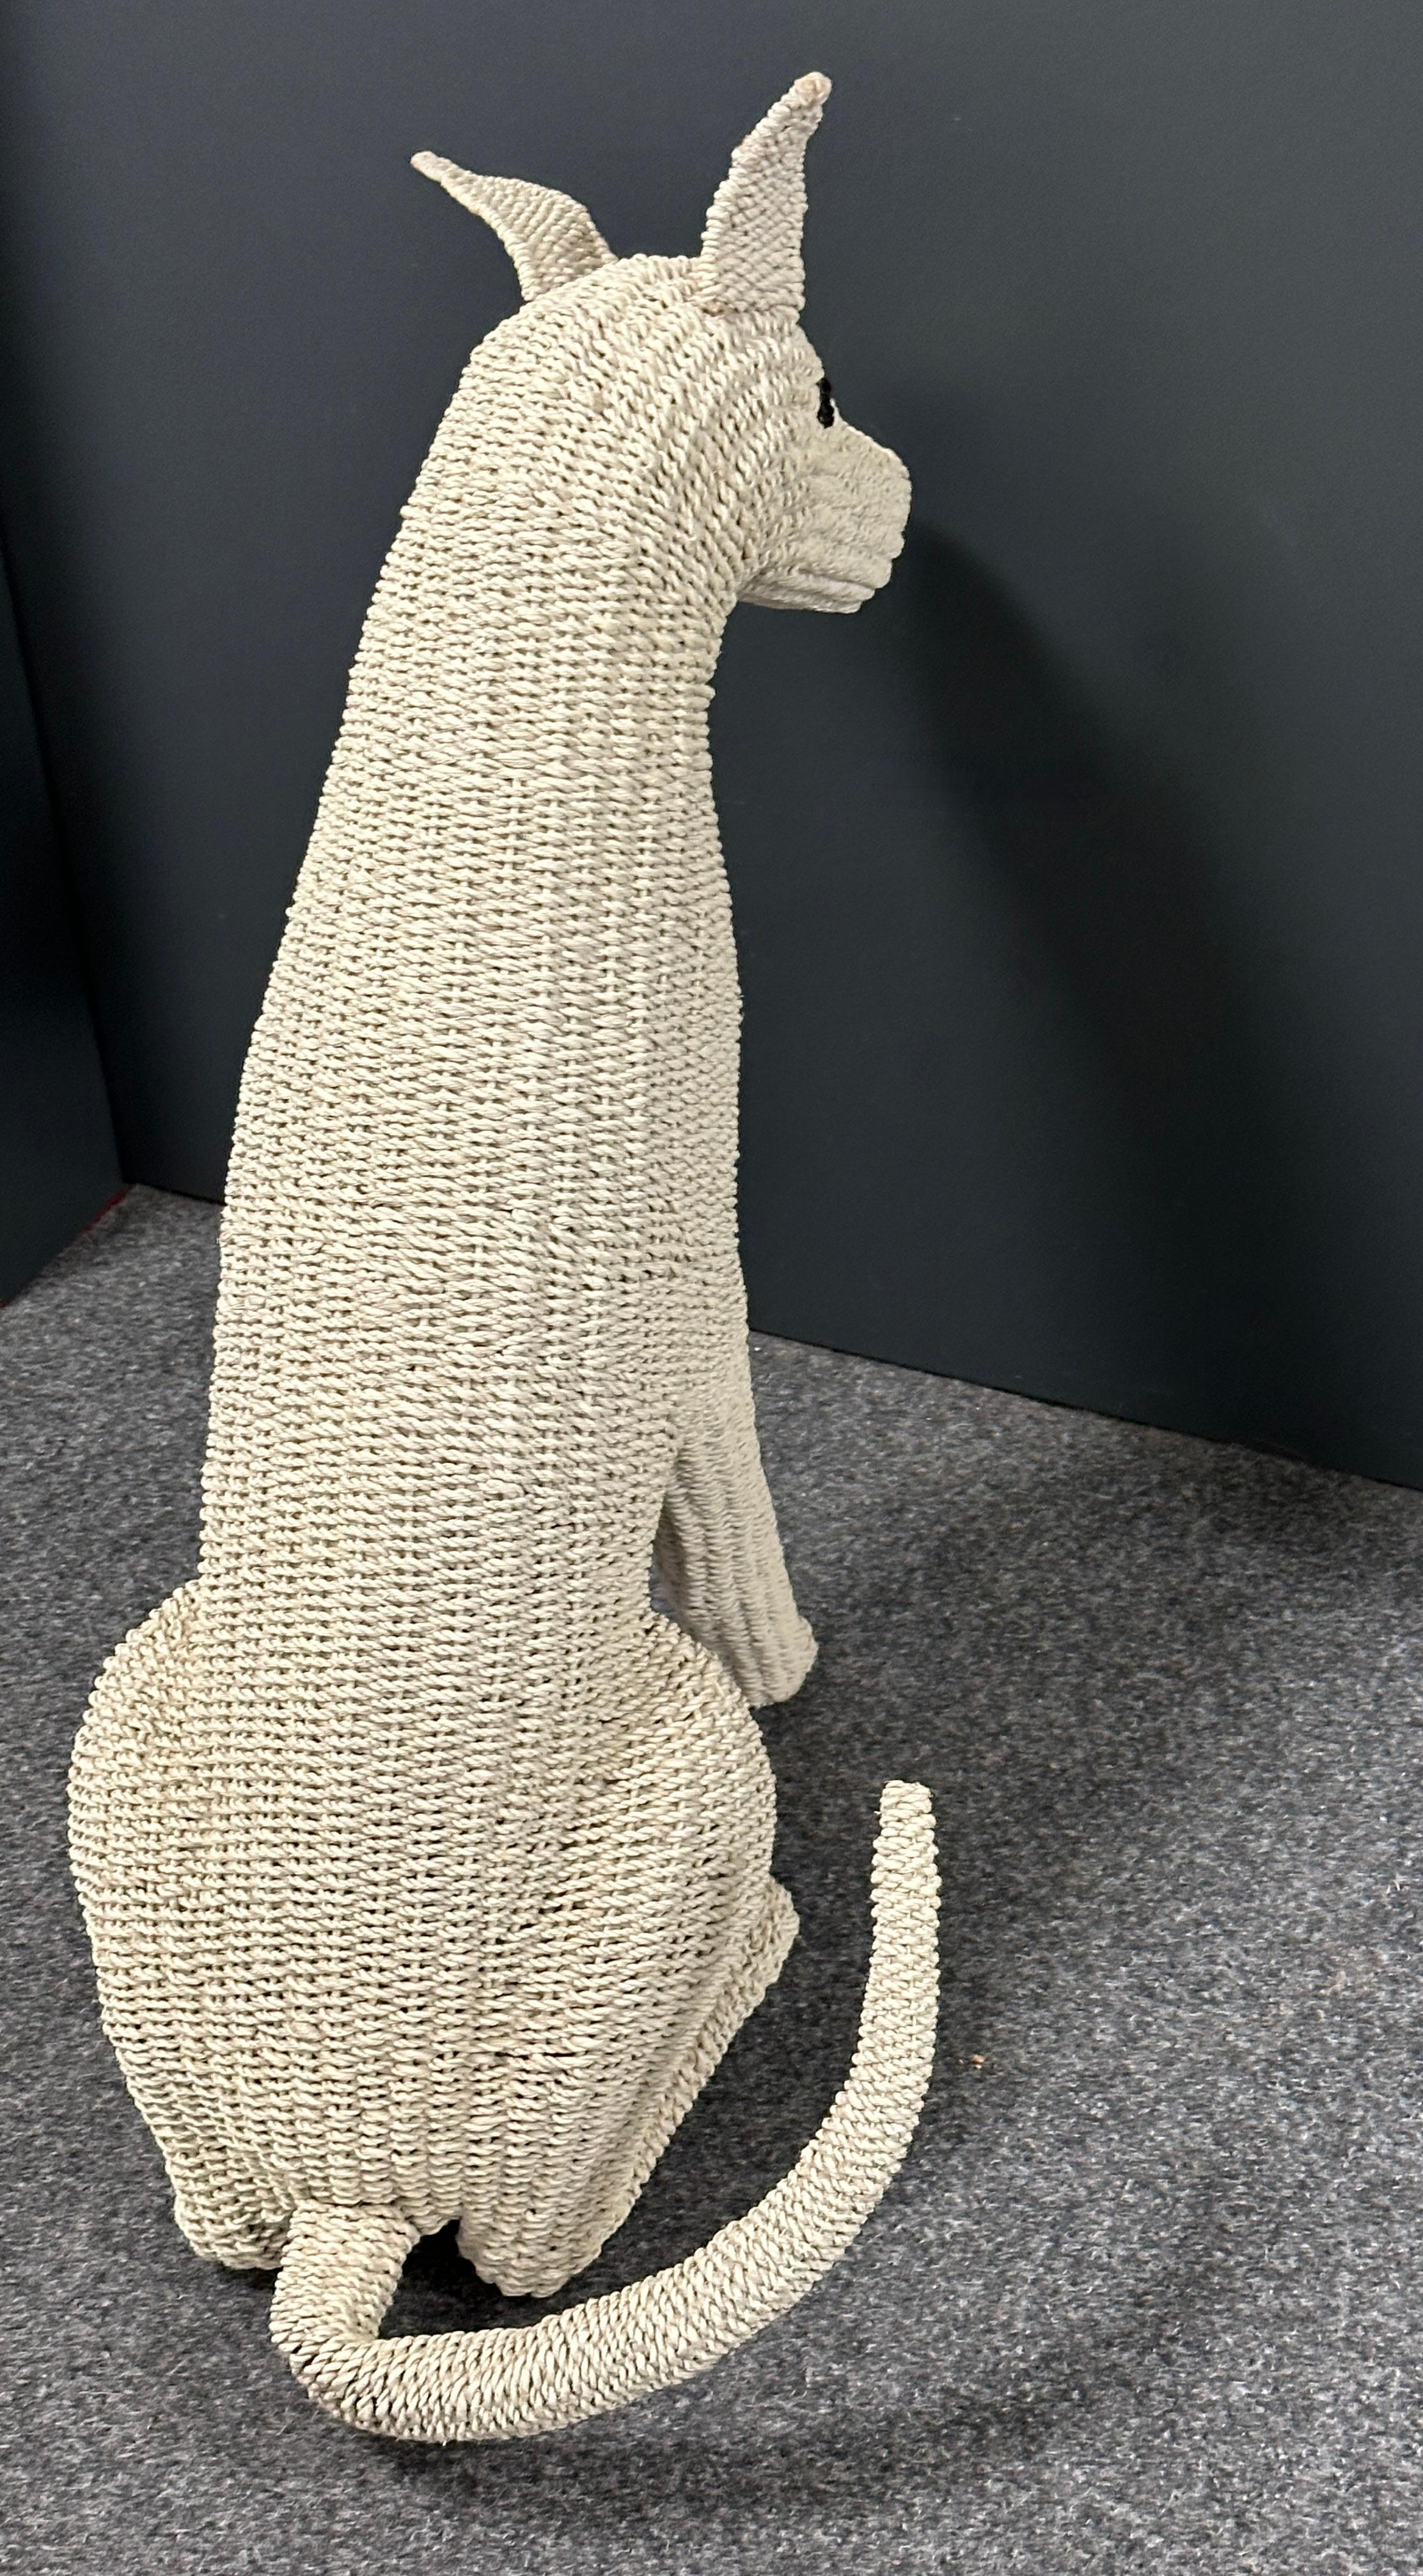 Stunning Life Size White Rattan Wicker Dog Statue Figure, Italy, 1960s For Sale 6